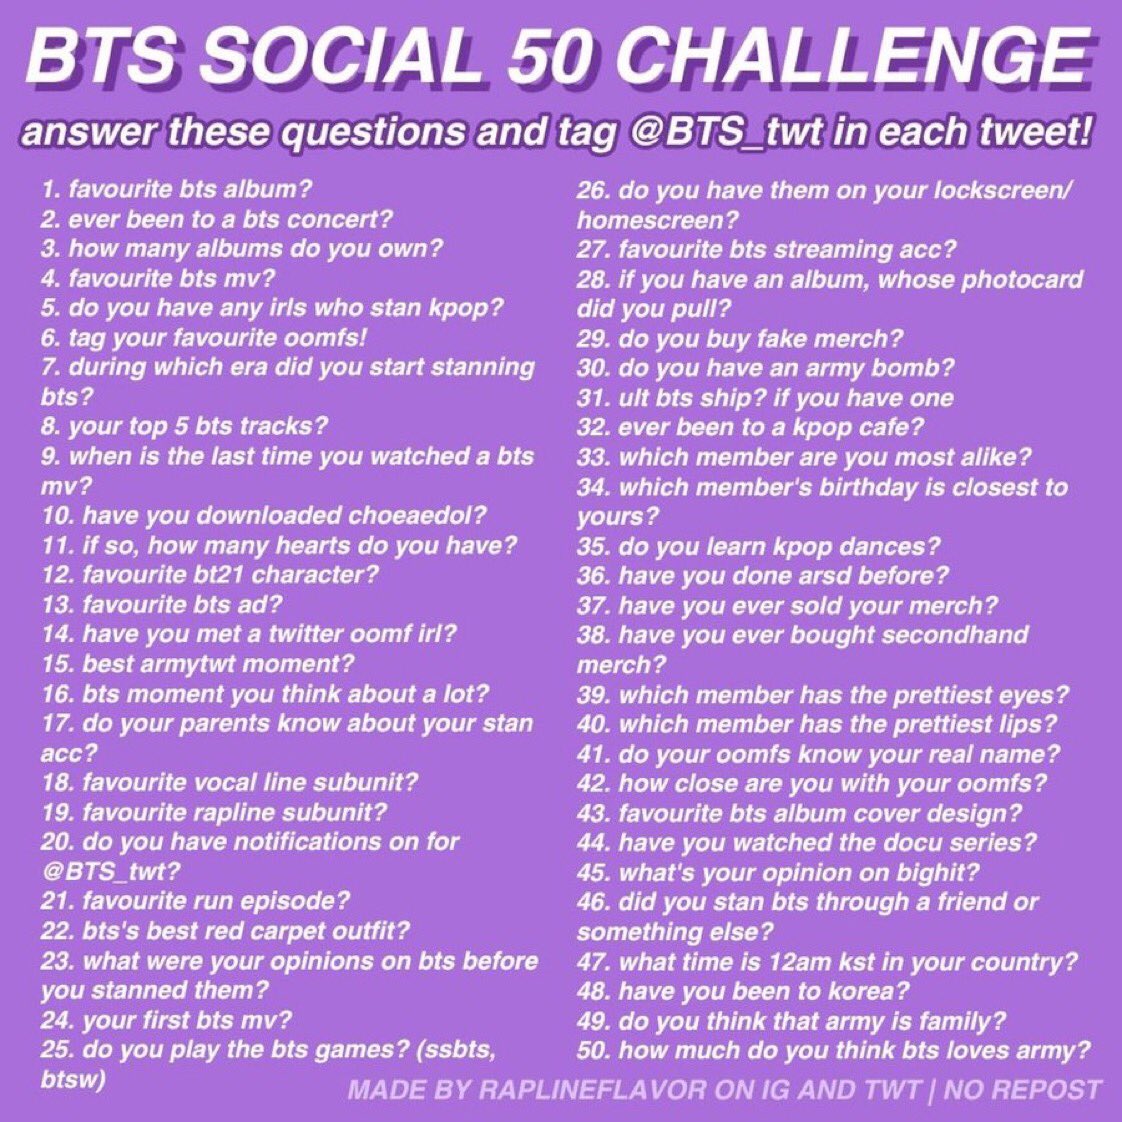 Small acc but I’m going to do this anyway to help because we need to secure our no. 1 spot on TS50 #MTVHotttest BTS  @BTS_twt